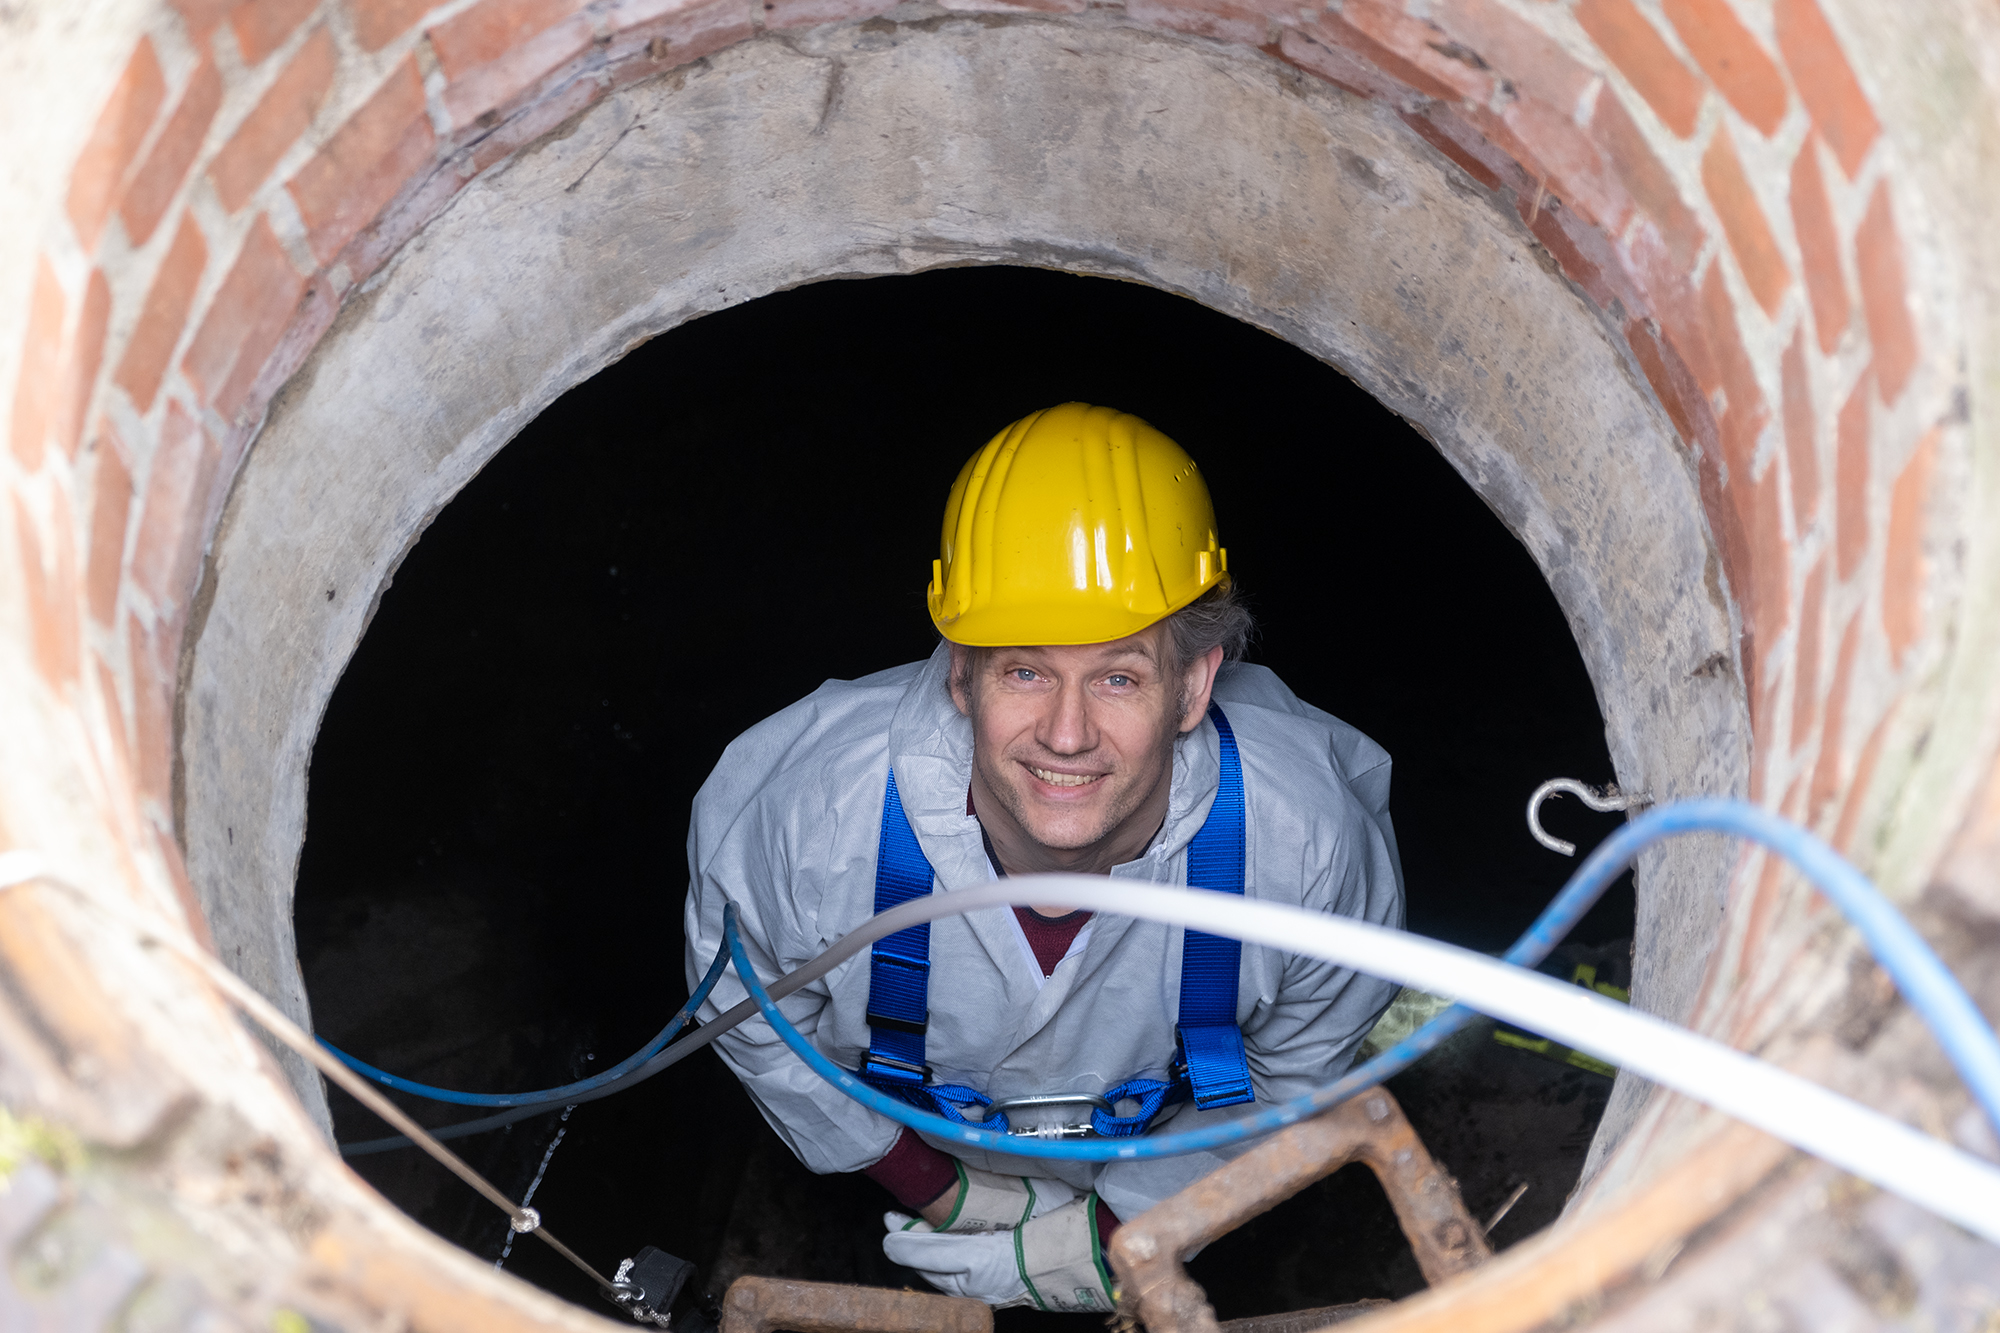 A scientist standing in the storm sewer and smiling at us through the drain